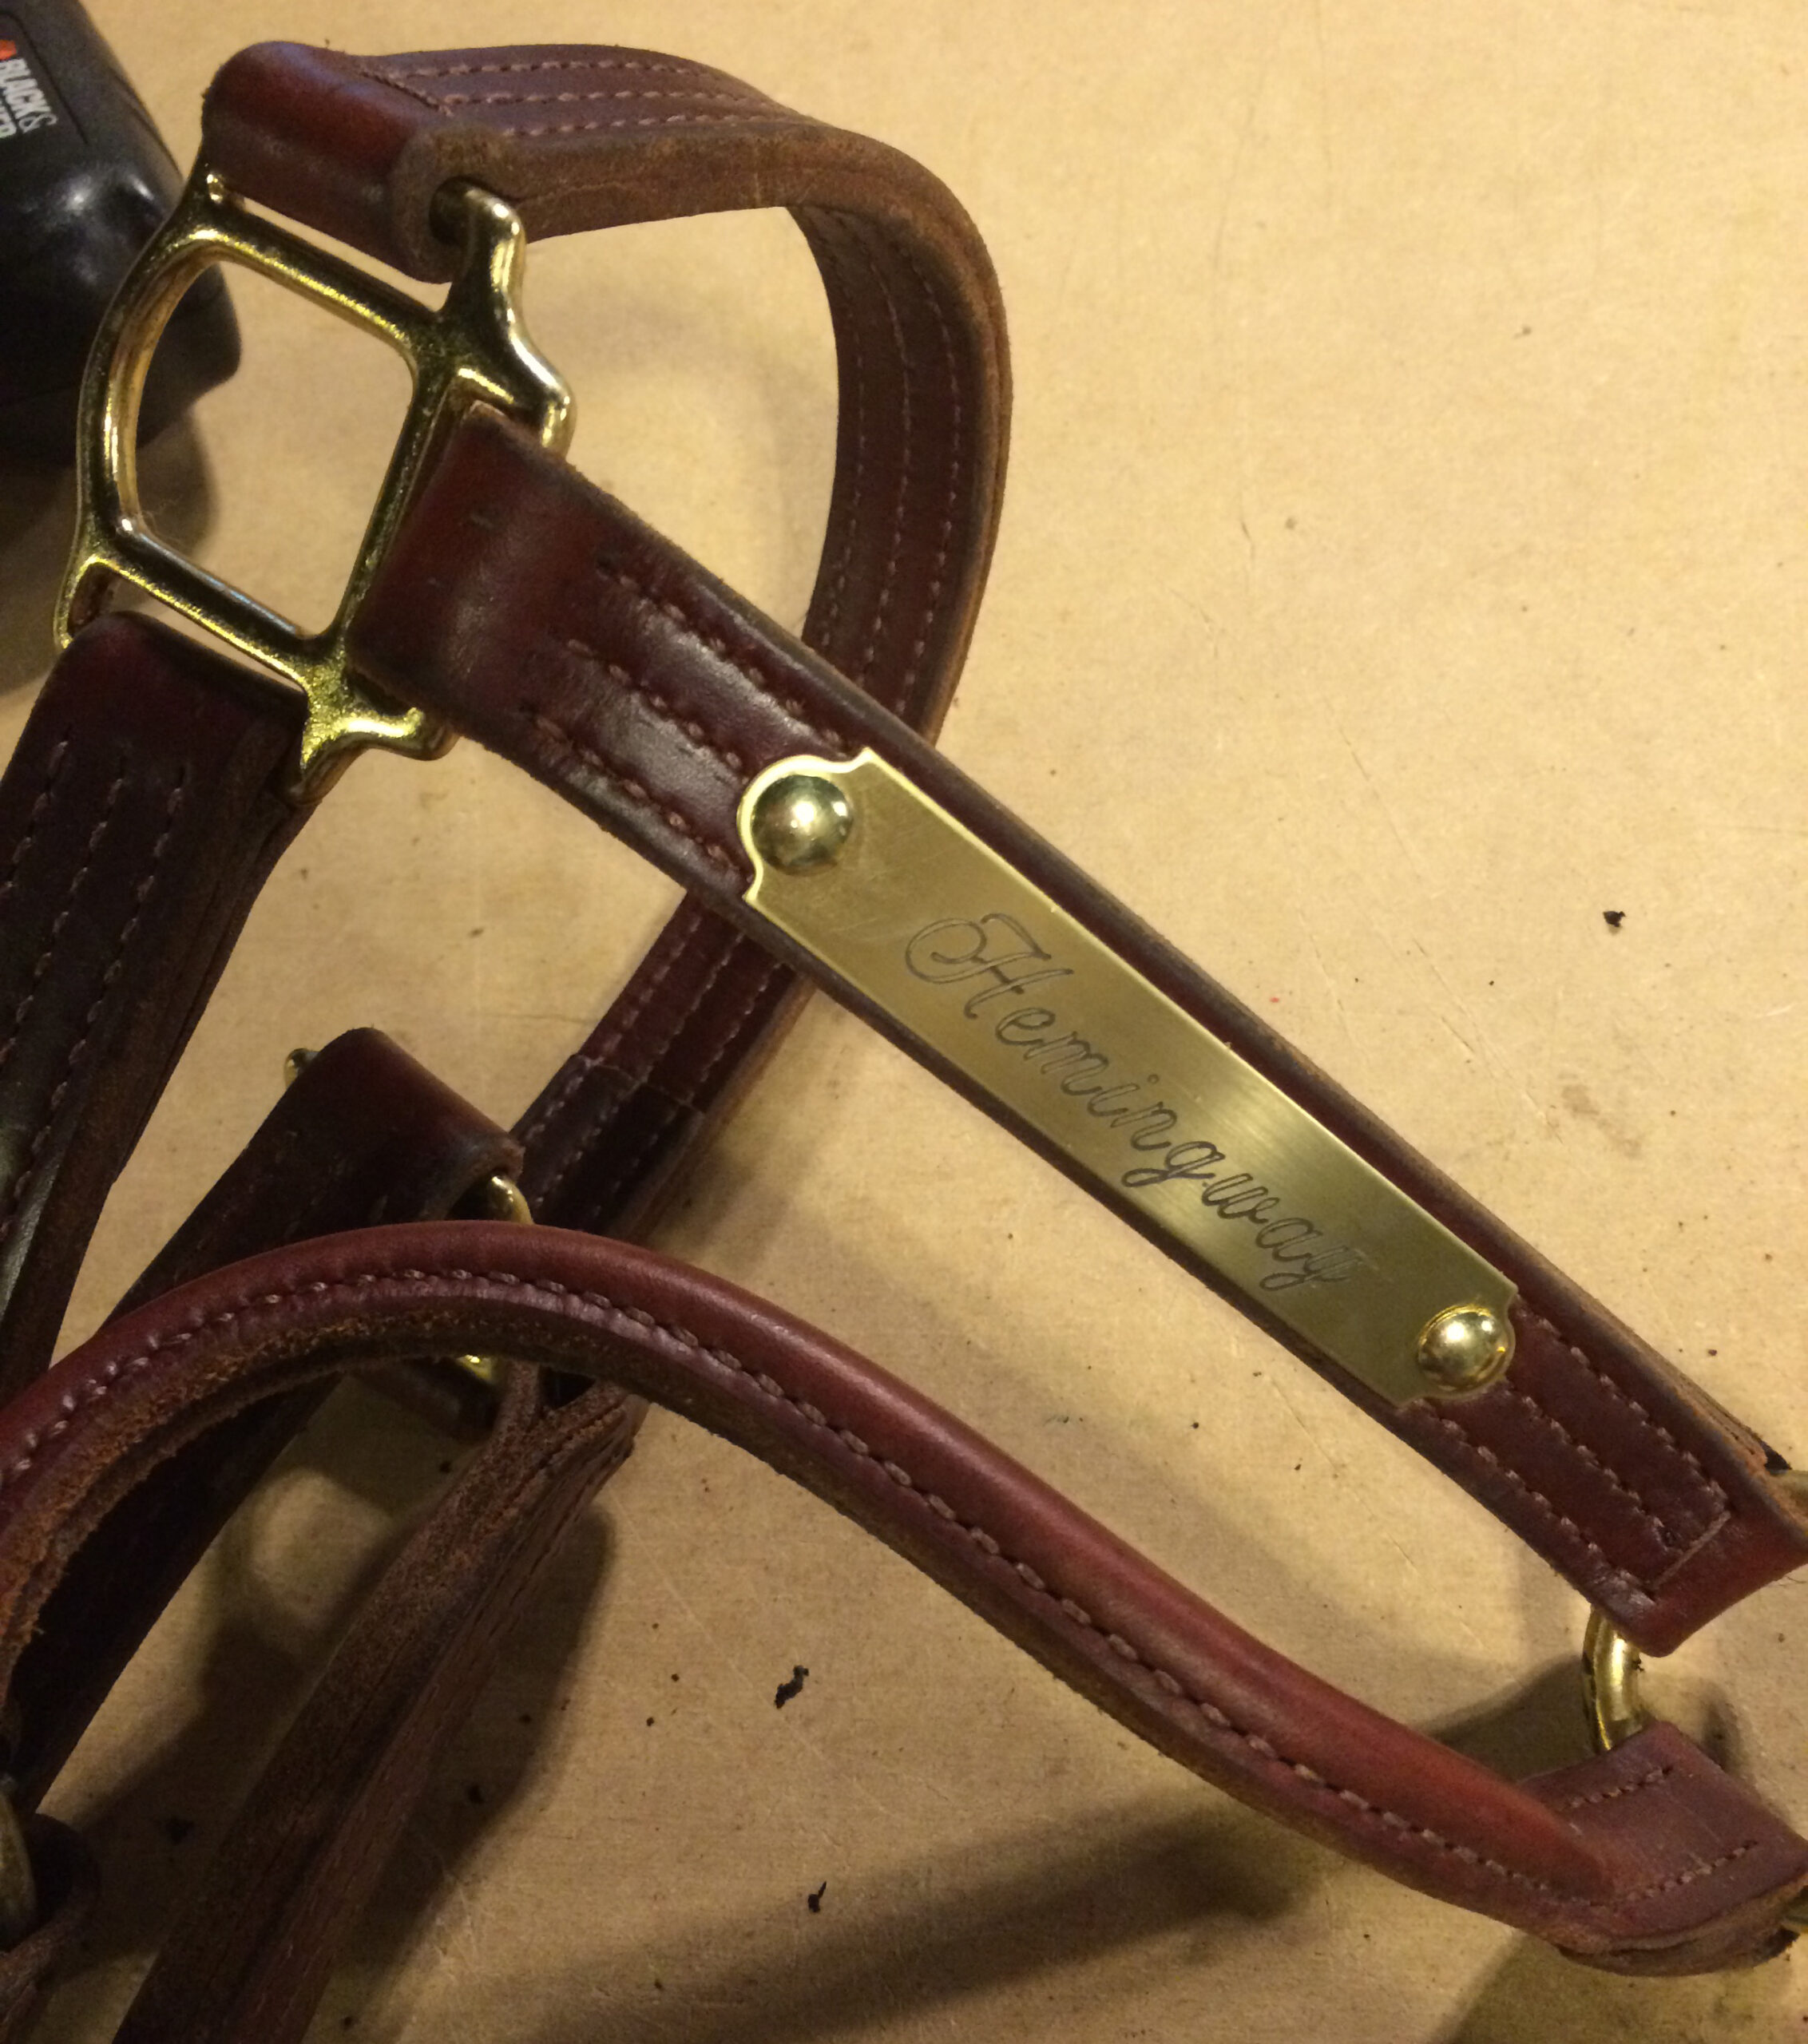 Halter with engraved plate attached